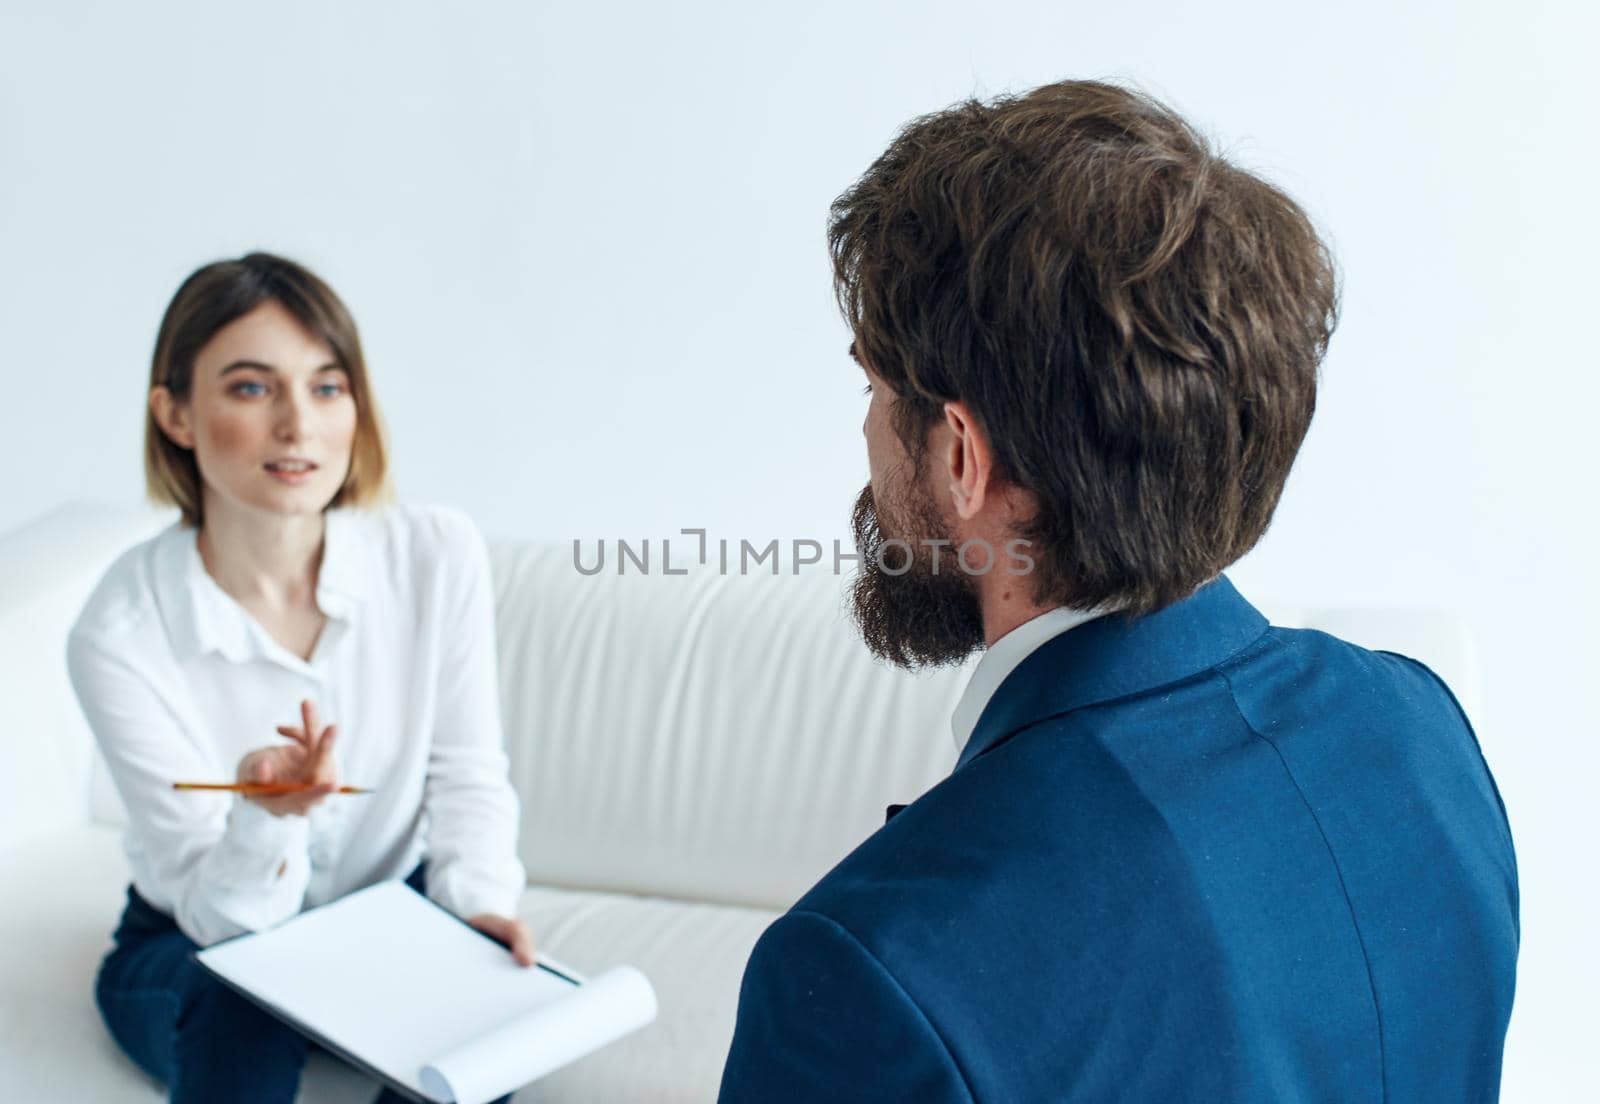 A man in a blue jacket and a beard talks to a woman on the sofa indoors by SHOTPRIME